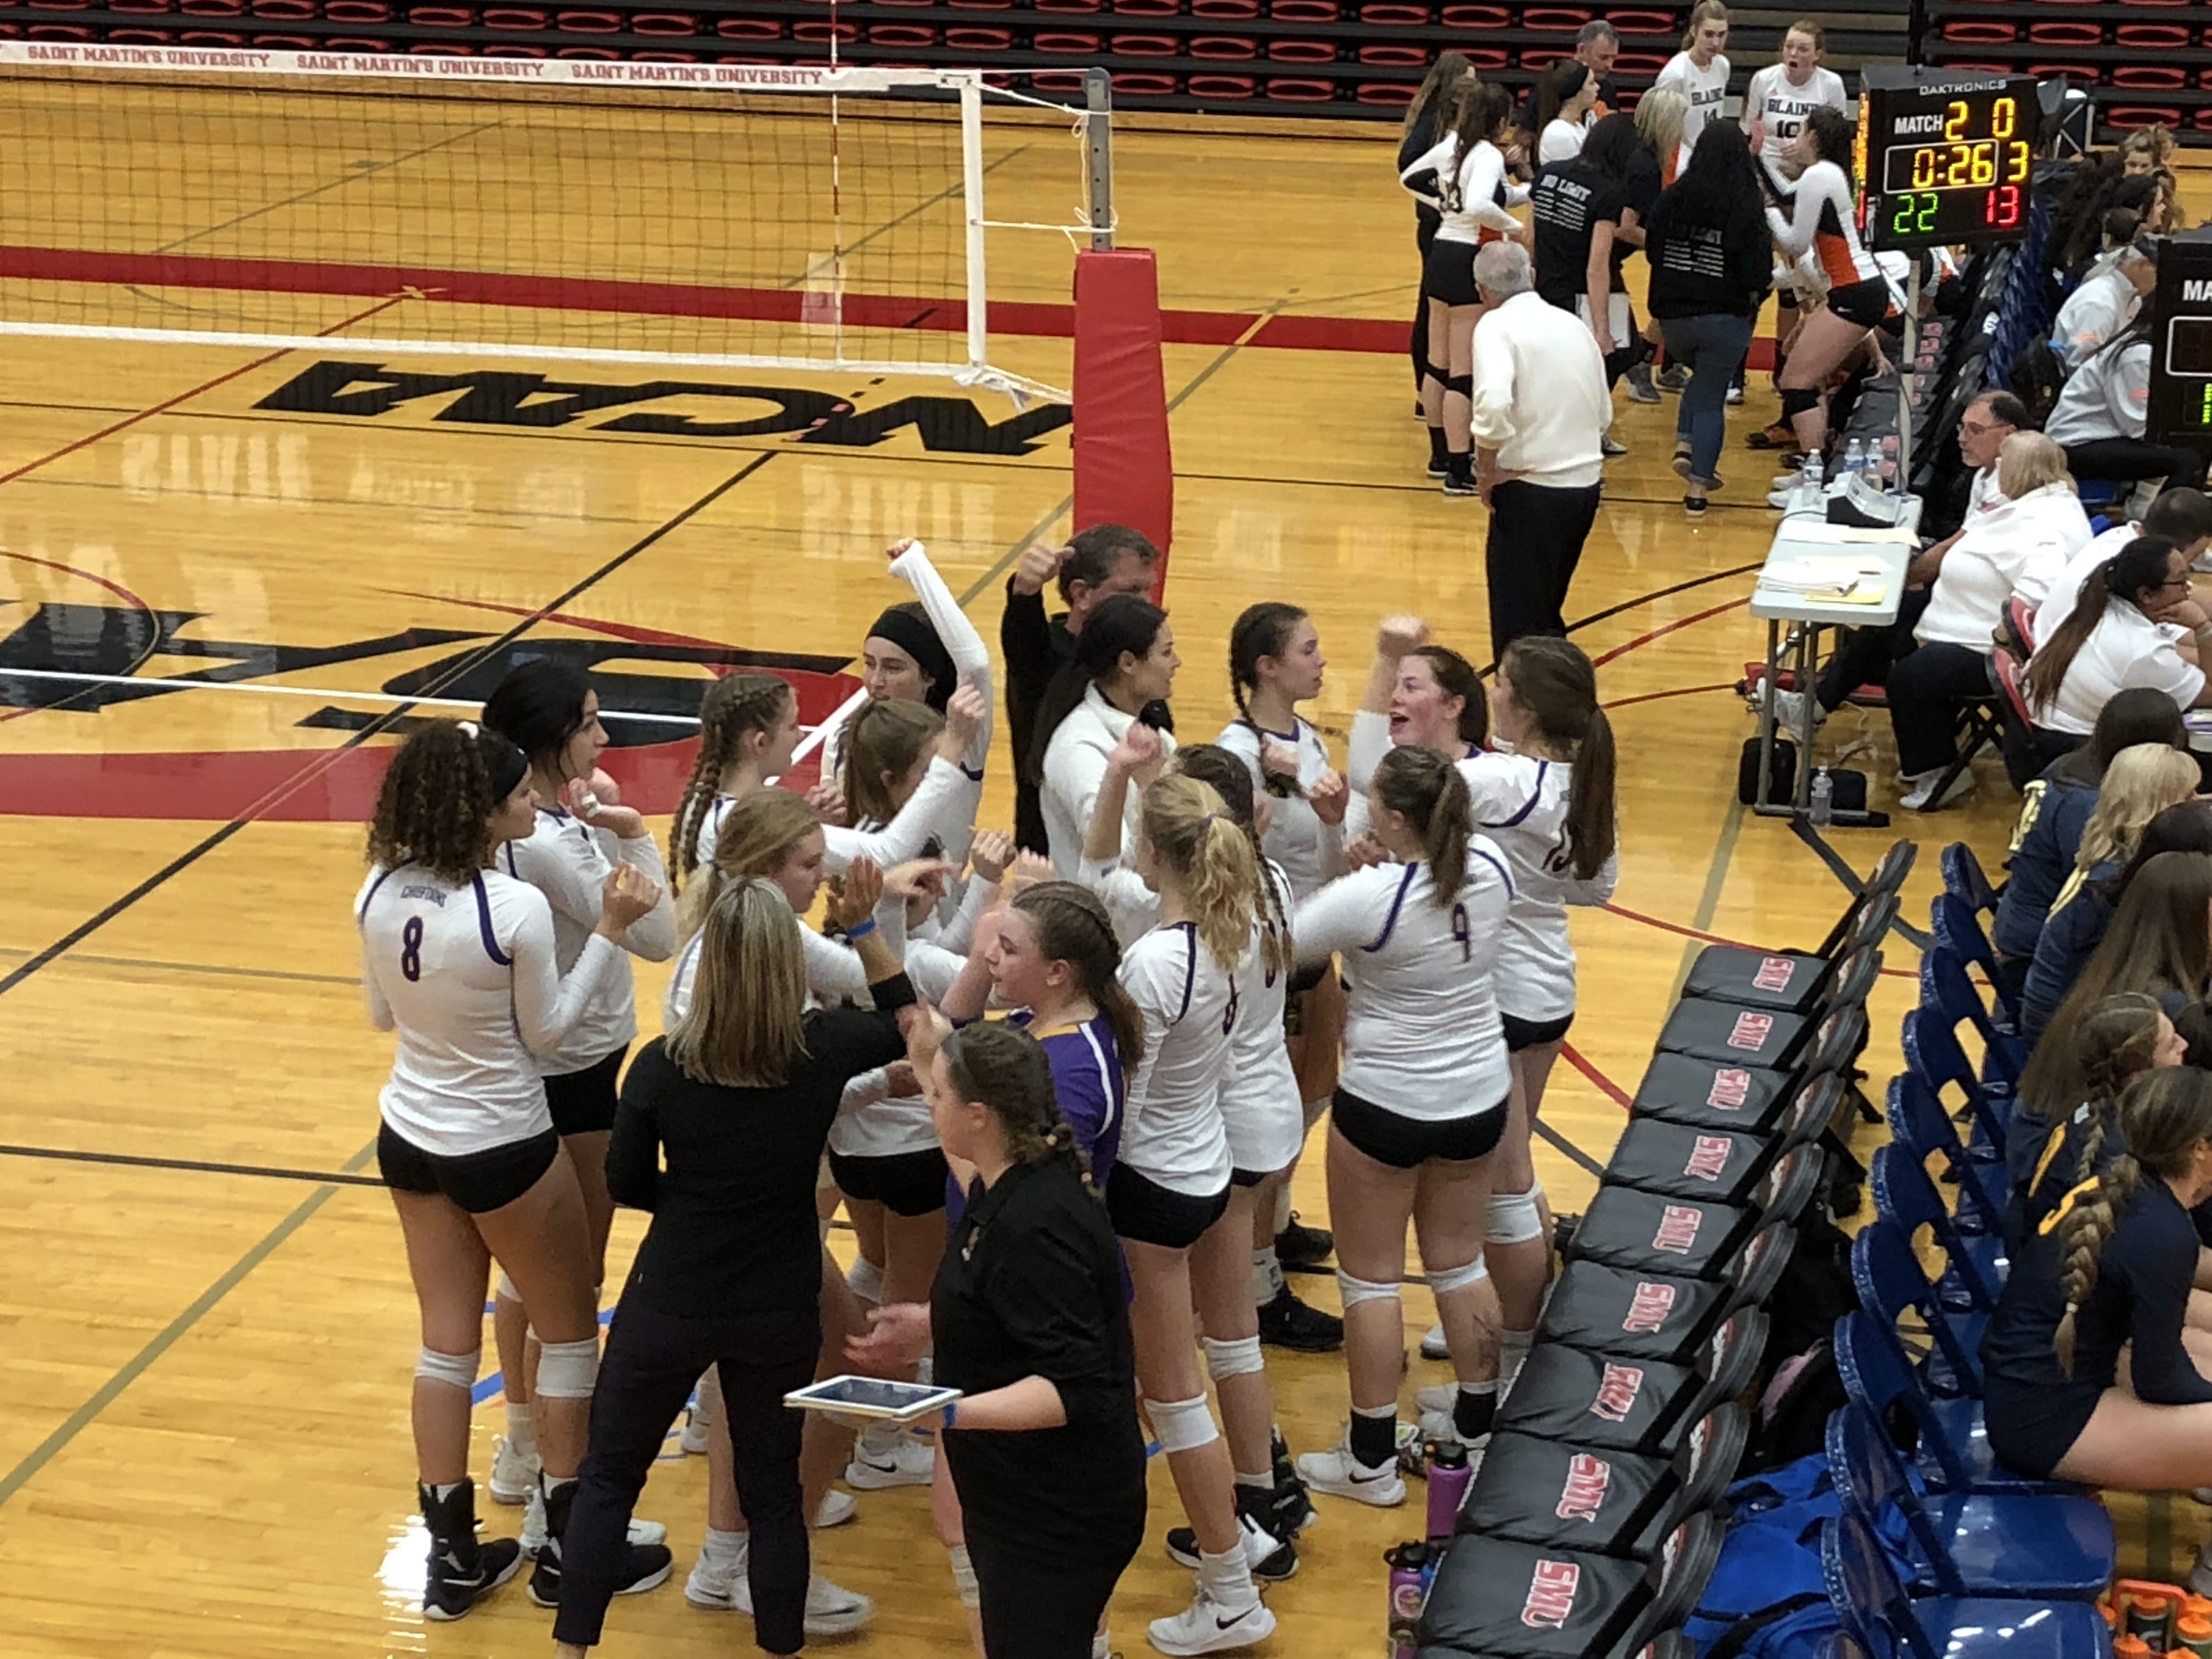 The Columbia River volleyball team huddles during its 2A state quarterfinal match against Blaine on Friday at Saint Martin's University in Lacey.